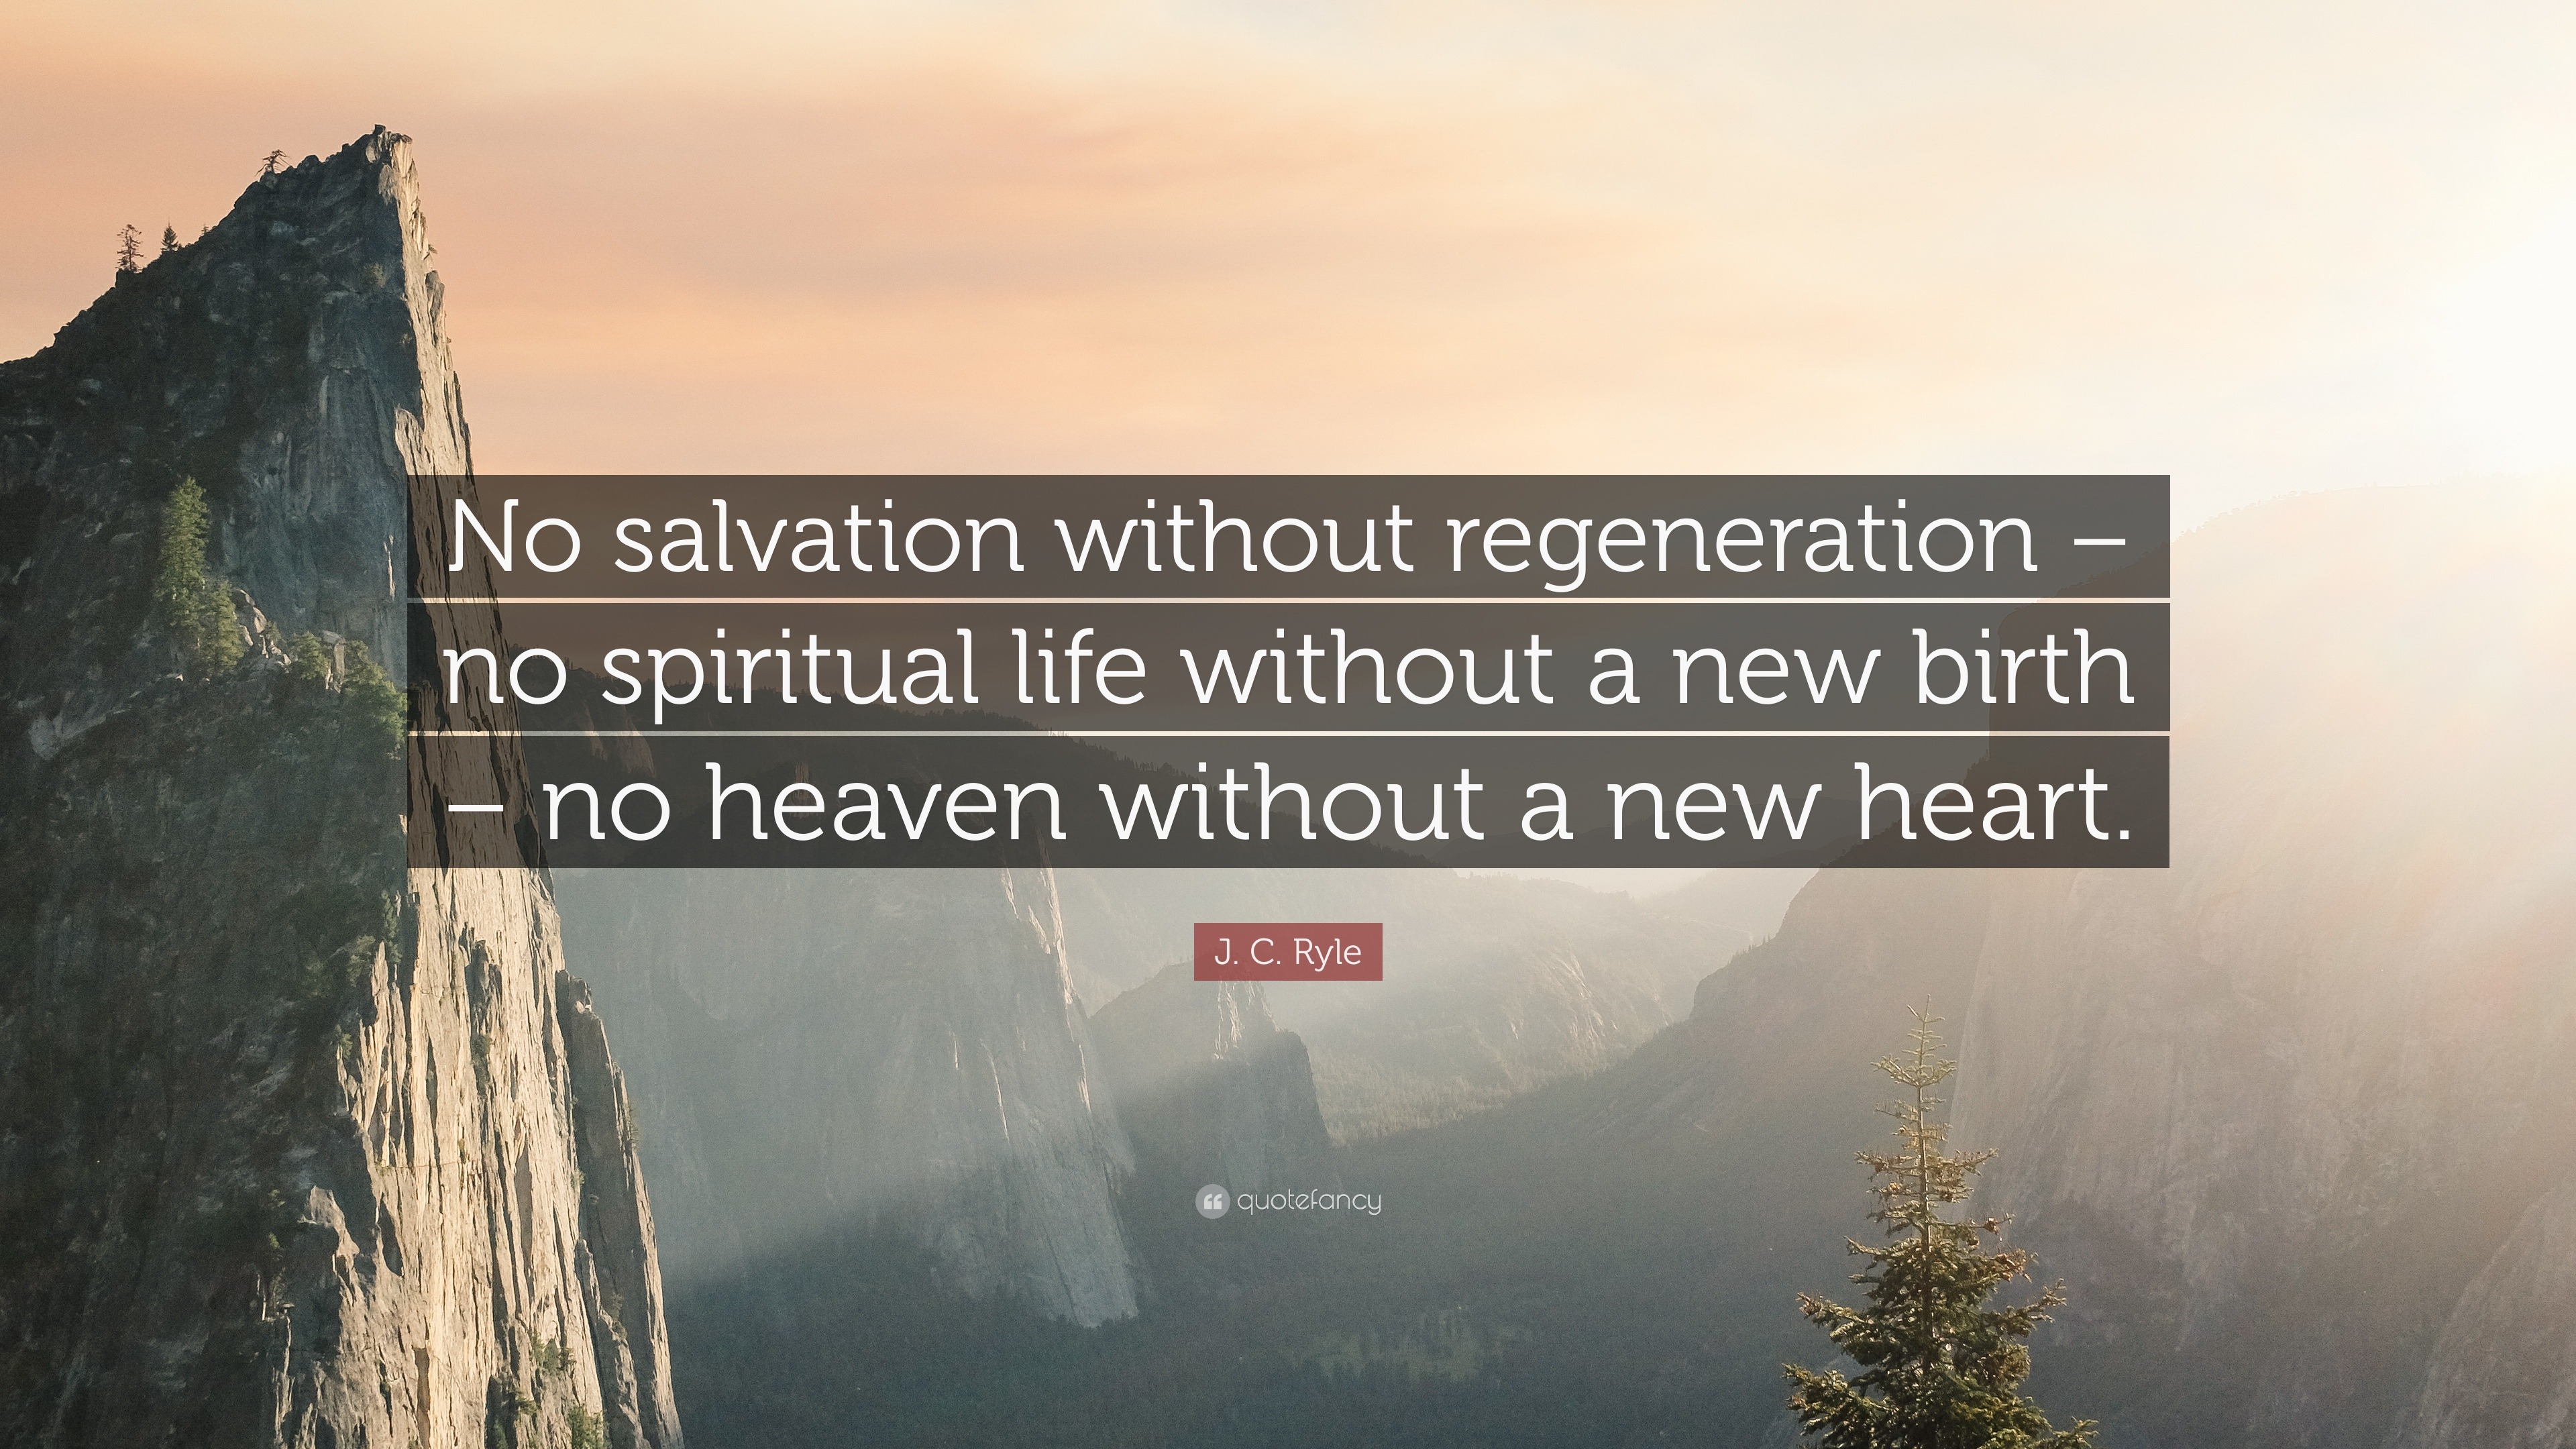 J C Ryle Quote “No salvation without regeneration – no spiritual life without a new